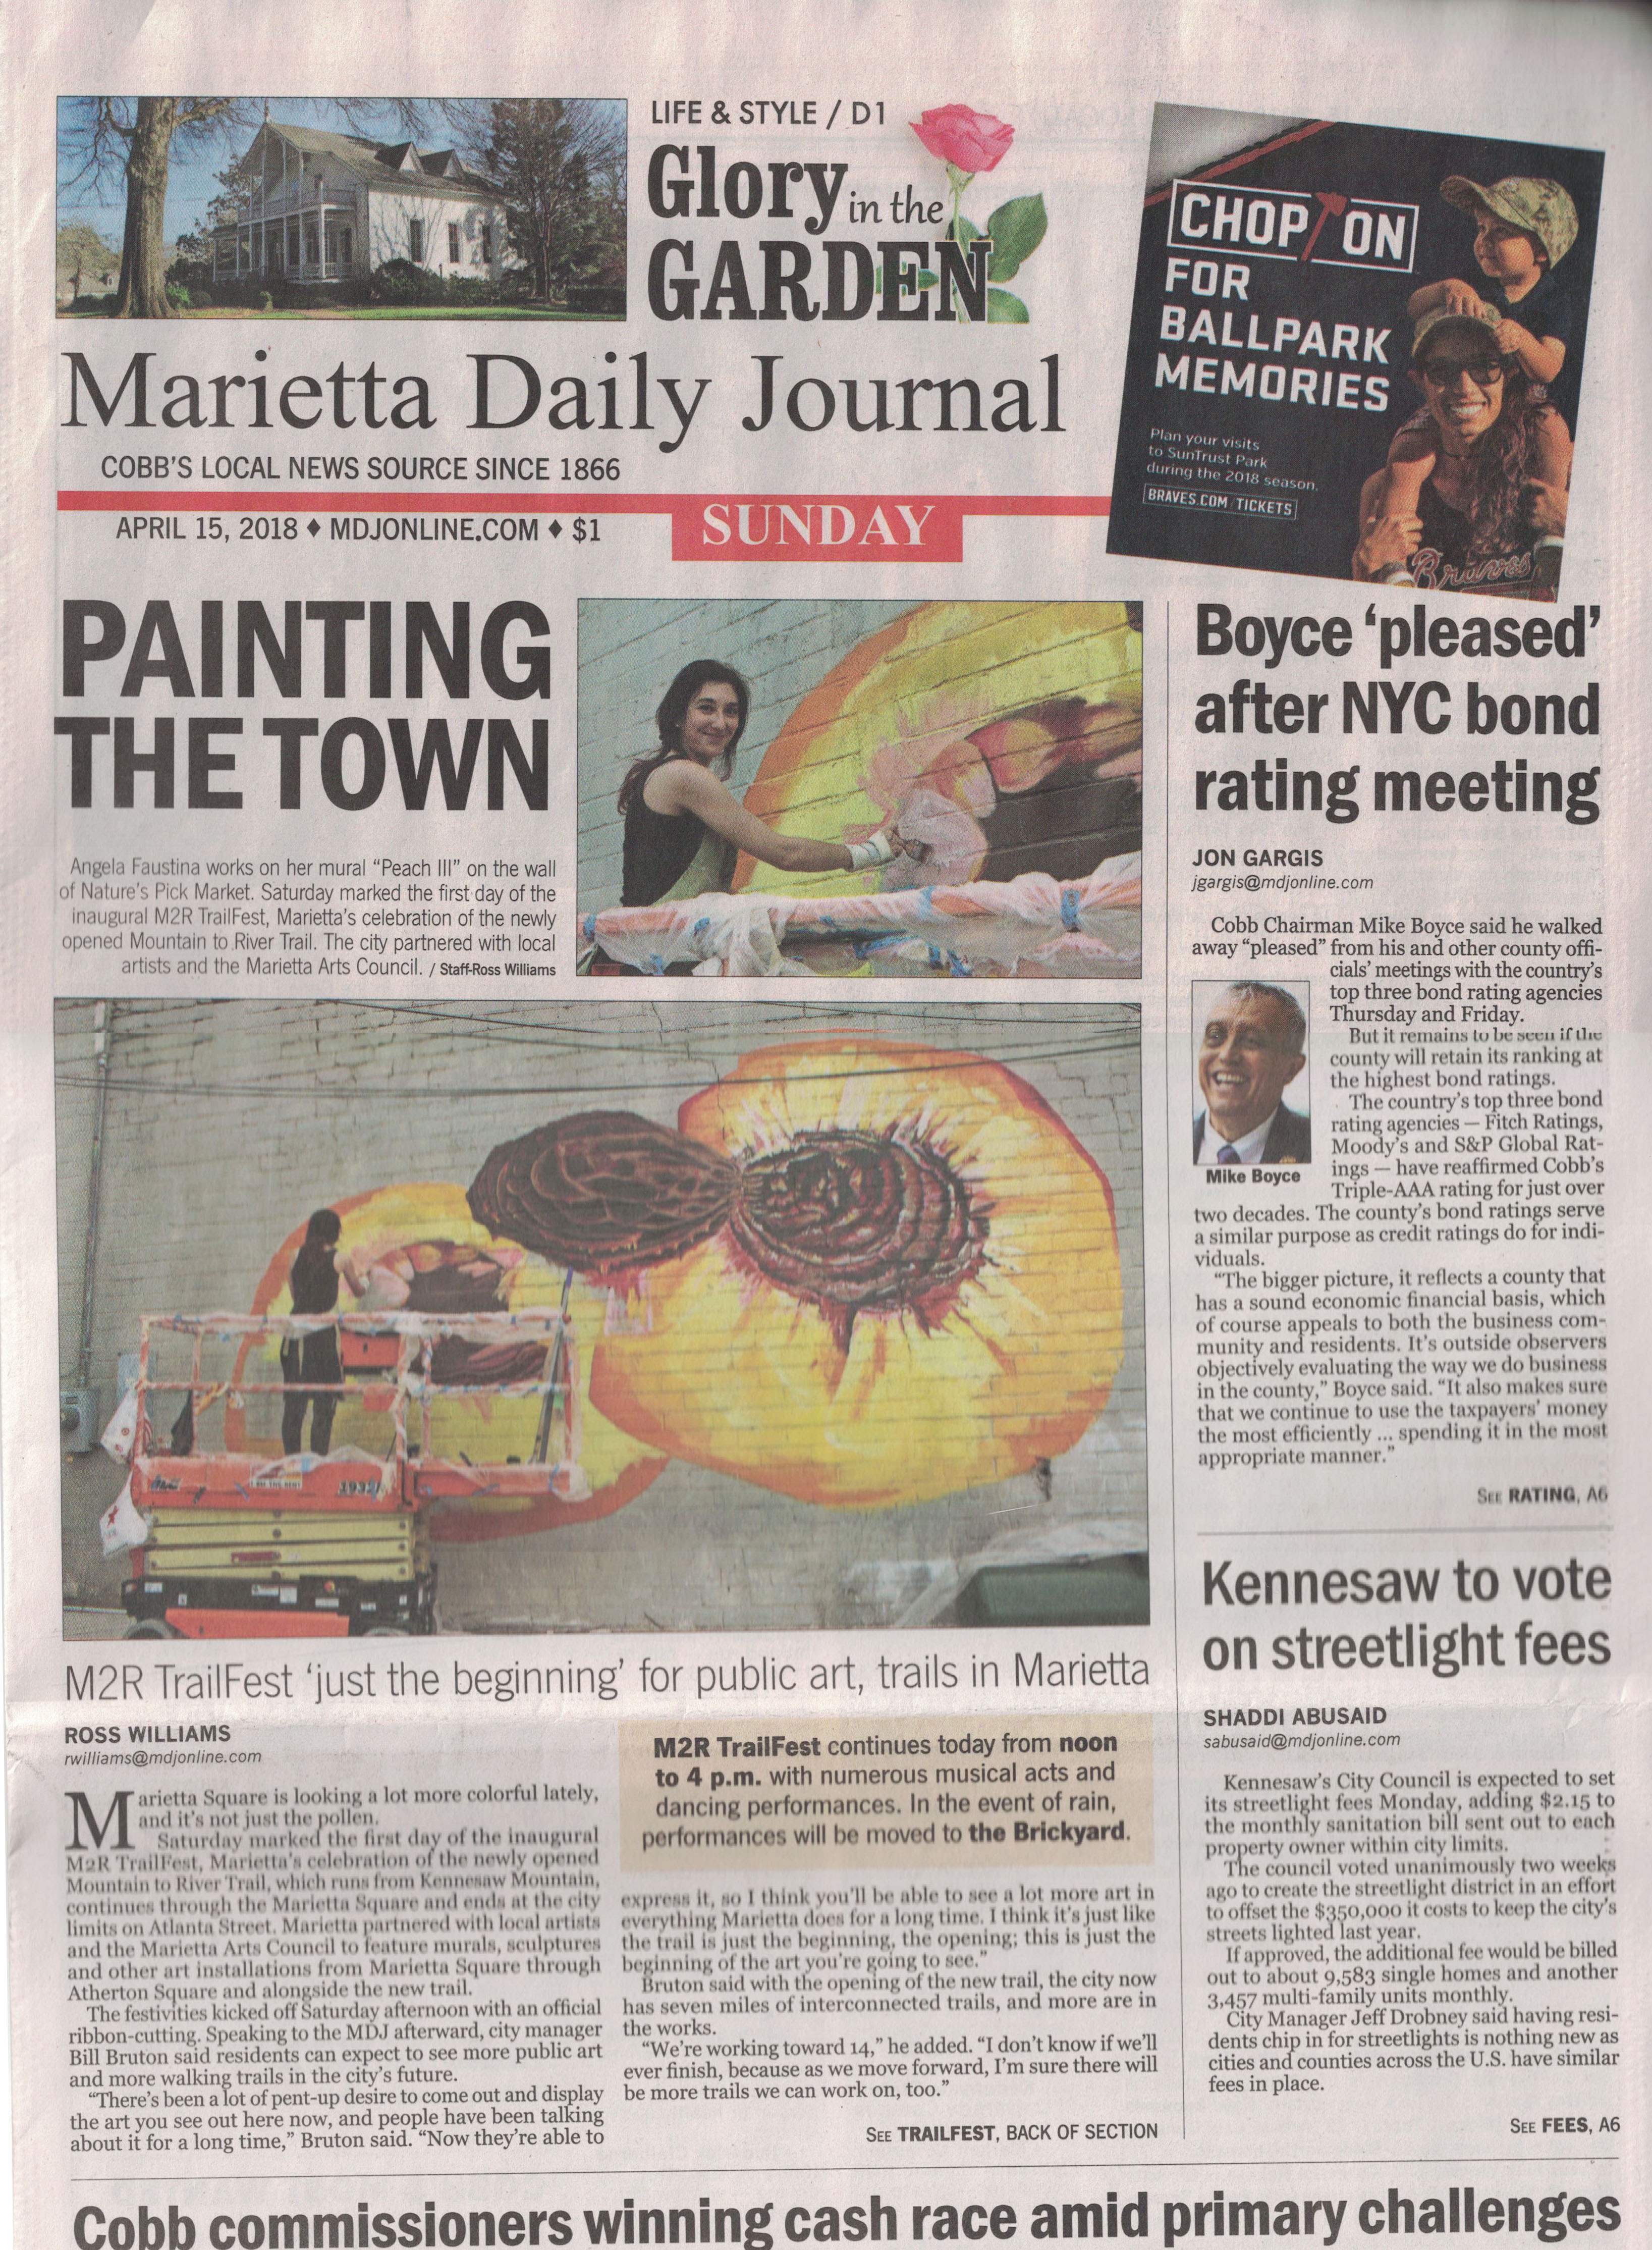 Marietta Daily Journal front page news article about Angela Faustina painting Peach III mural on Marietta Square for the M2R Trailfest, sponsored by Nature's Pick Market.